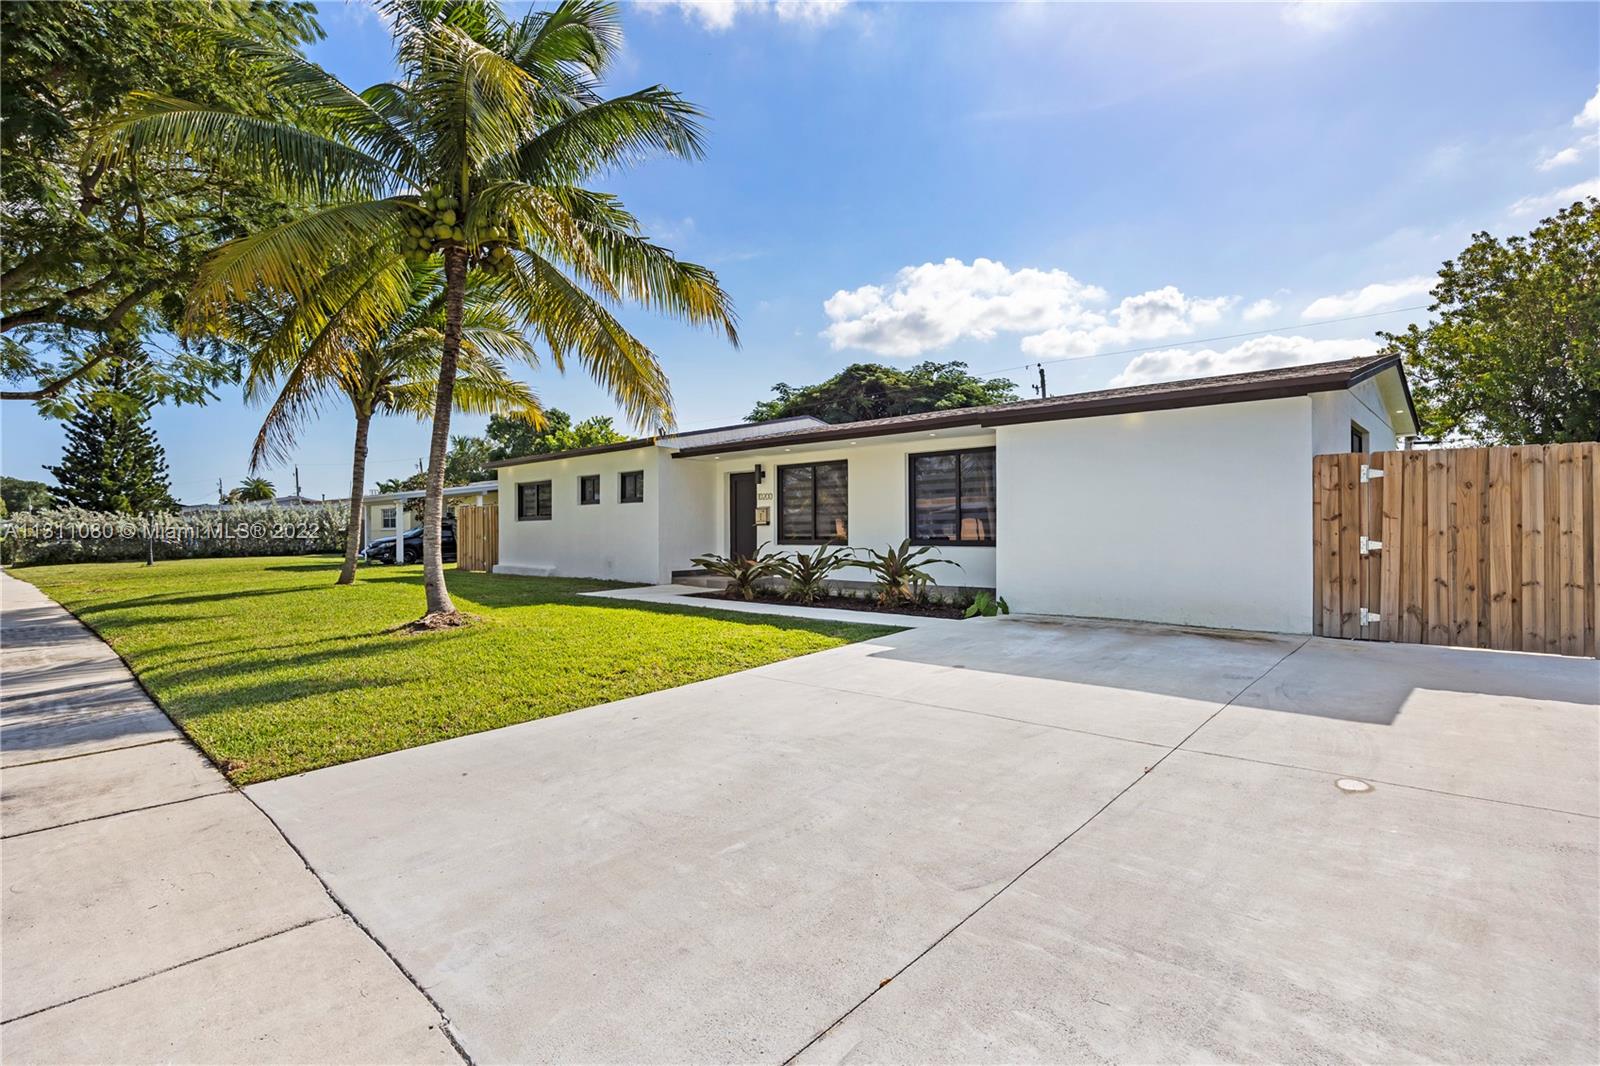 This Fully renovated 4/3 single-family home, 1.544 sq. ft, is located in the family-oriented Cutler Bay neighborhood. The garage was converted to the 4th bedroom and bathroom. The property features a new roof in 2021, new AC, an open concept floor plan, a new kitchen equipped with stainless still appliances and quartz countertops, and all renovated bathrooms. With new impact windows & doors, you will be eligible to receive a reduction in your windstorm premium, reduce your out-of-pocket expenses, such as your hurricane deductible, and minimize the damage to your home from a hurricane. This ground-floor one-story home lies in an AE flood zone. Large lot 8,933 sq. ft. also has the potential to build a pool and RV & Boat parking room on the side.